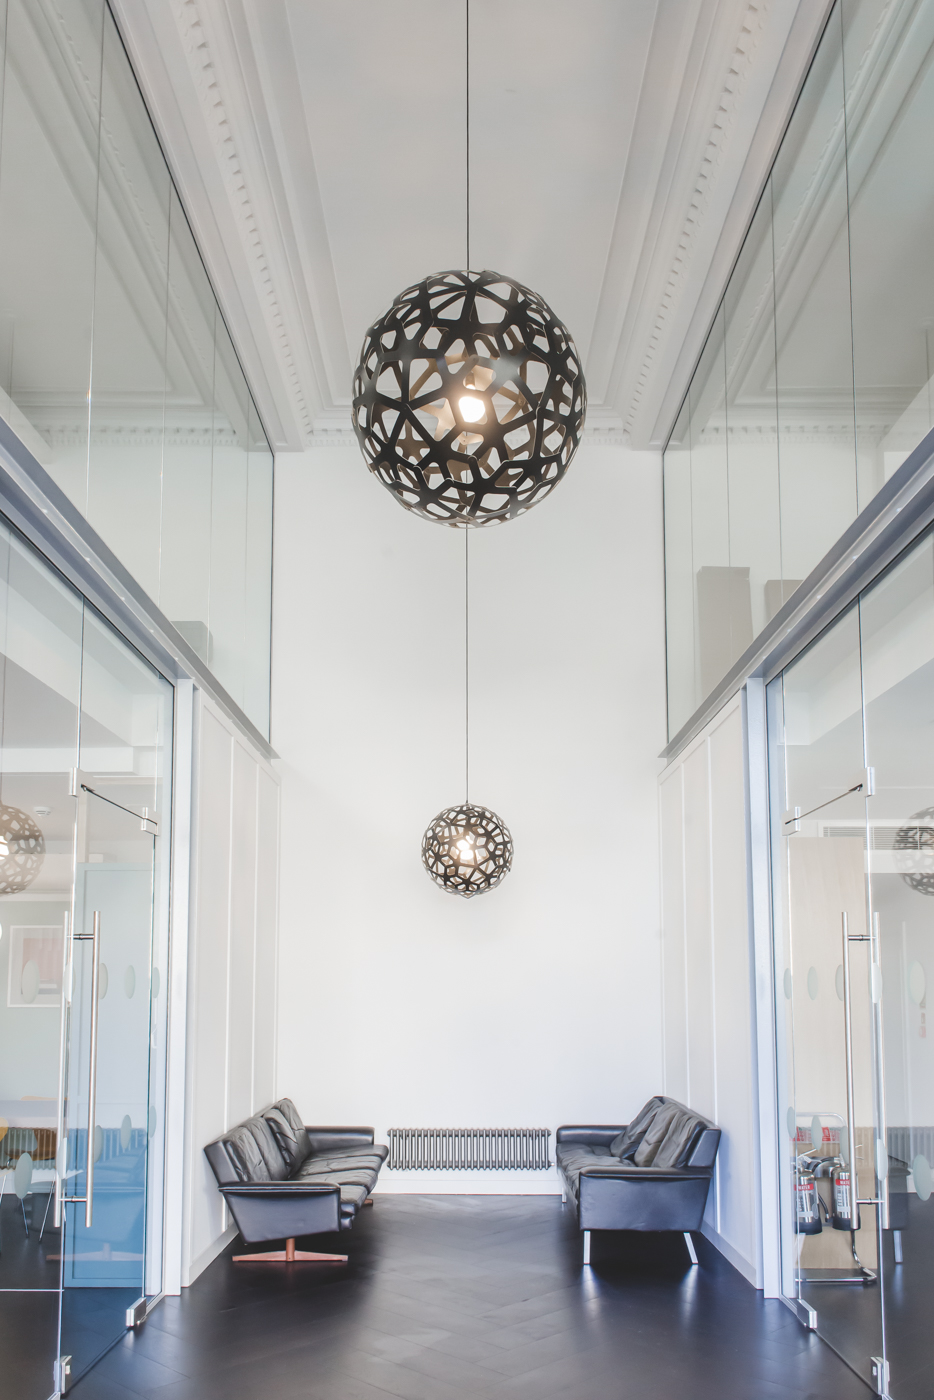 Lobby space with artistic pendant lights